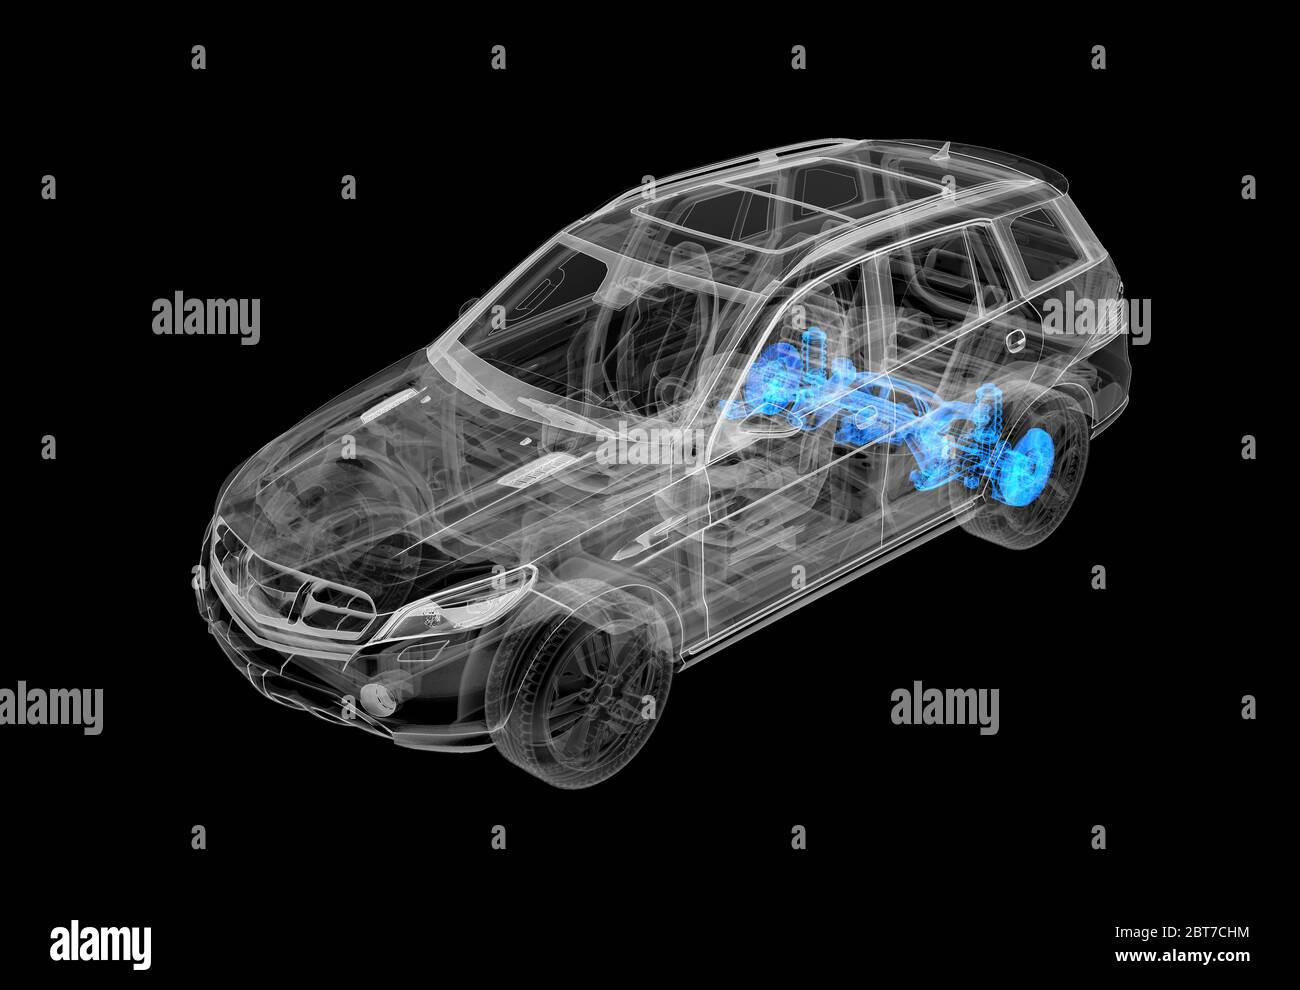 Technical 3d illustration of SUV car with x-ray effect. Rear brakes and suspension systems. Perspective view on black background. Stock Photo